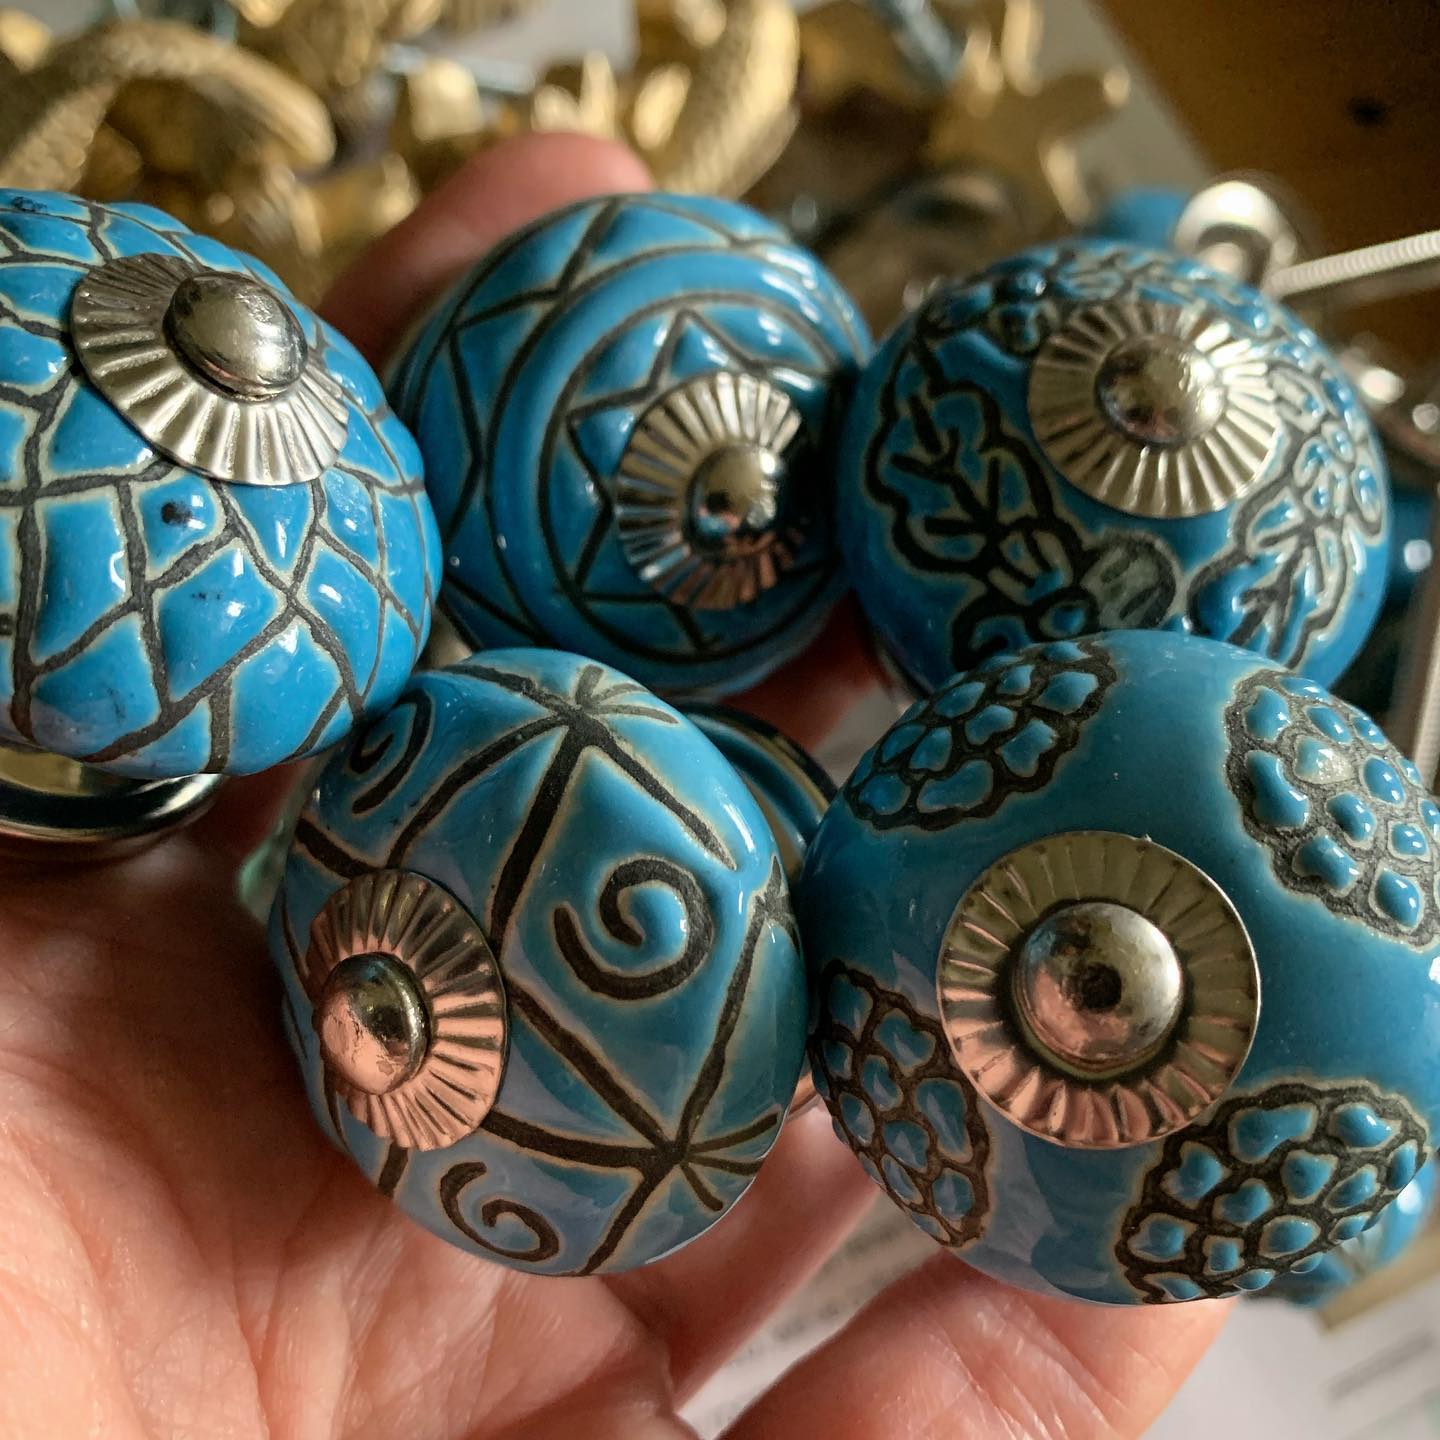 Prepping for Sundays @clevedonsundaymarket and just had a fresh delivery of knobs for our wedges! Beautiful Blues 🫶 Find these and a lovely varied selection of designs on our stall at the top of Hill Road!..#sundaymarket #dayout #attheseaside #clevedon #passionatelyindependent #homedecor #summertime #shopsmall #makers #smallbiz #westcountrylife